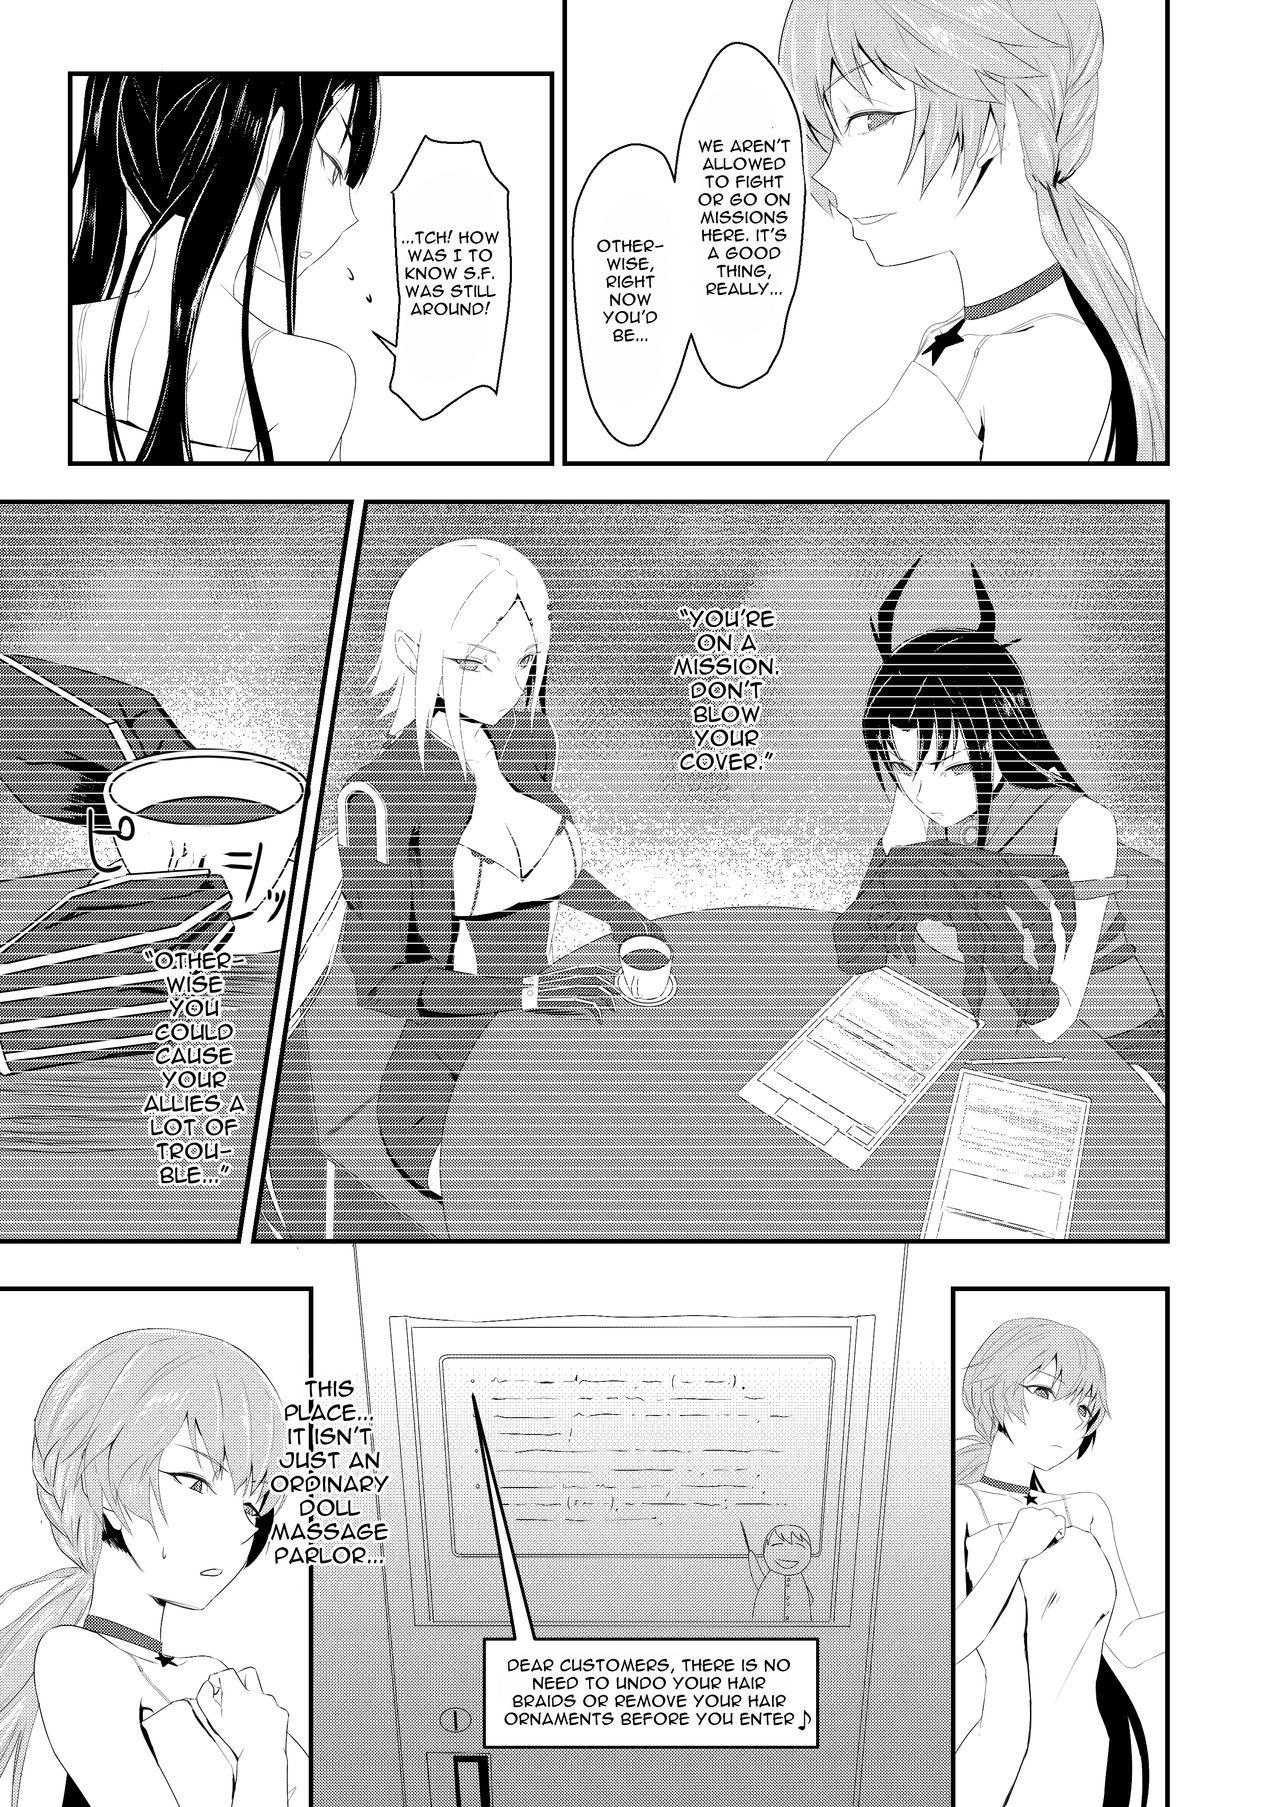 Trannies Enchou suru nara Watashi mo... | If You're Getting An Extension, Then I'll Have One Too... - Girls frontline Joven - Page 5